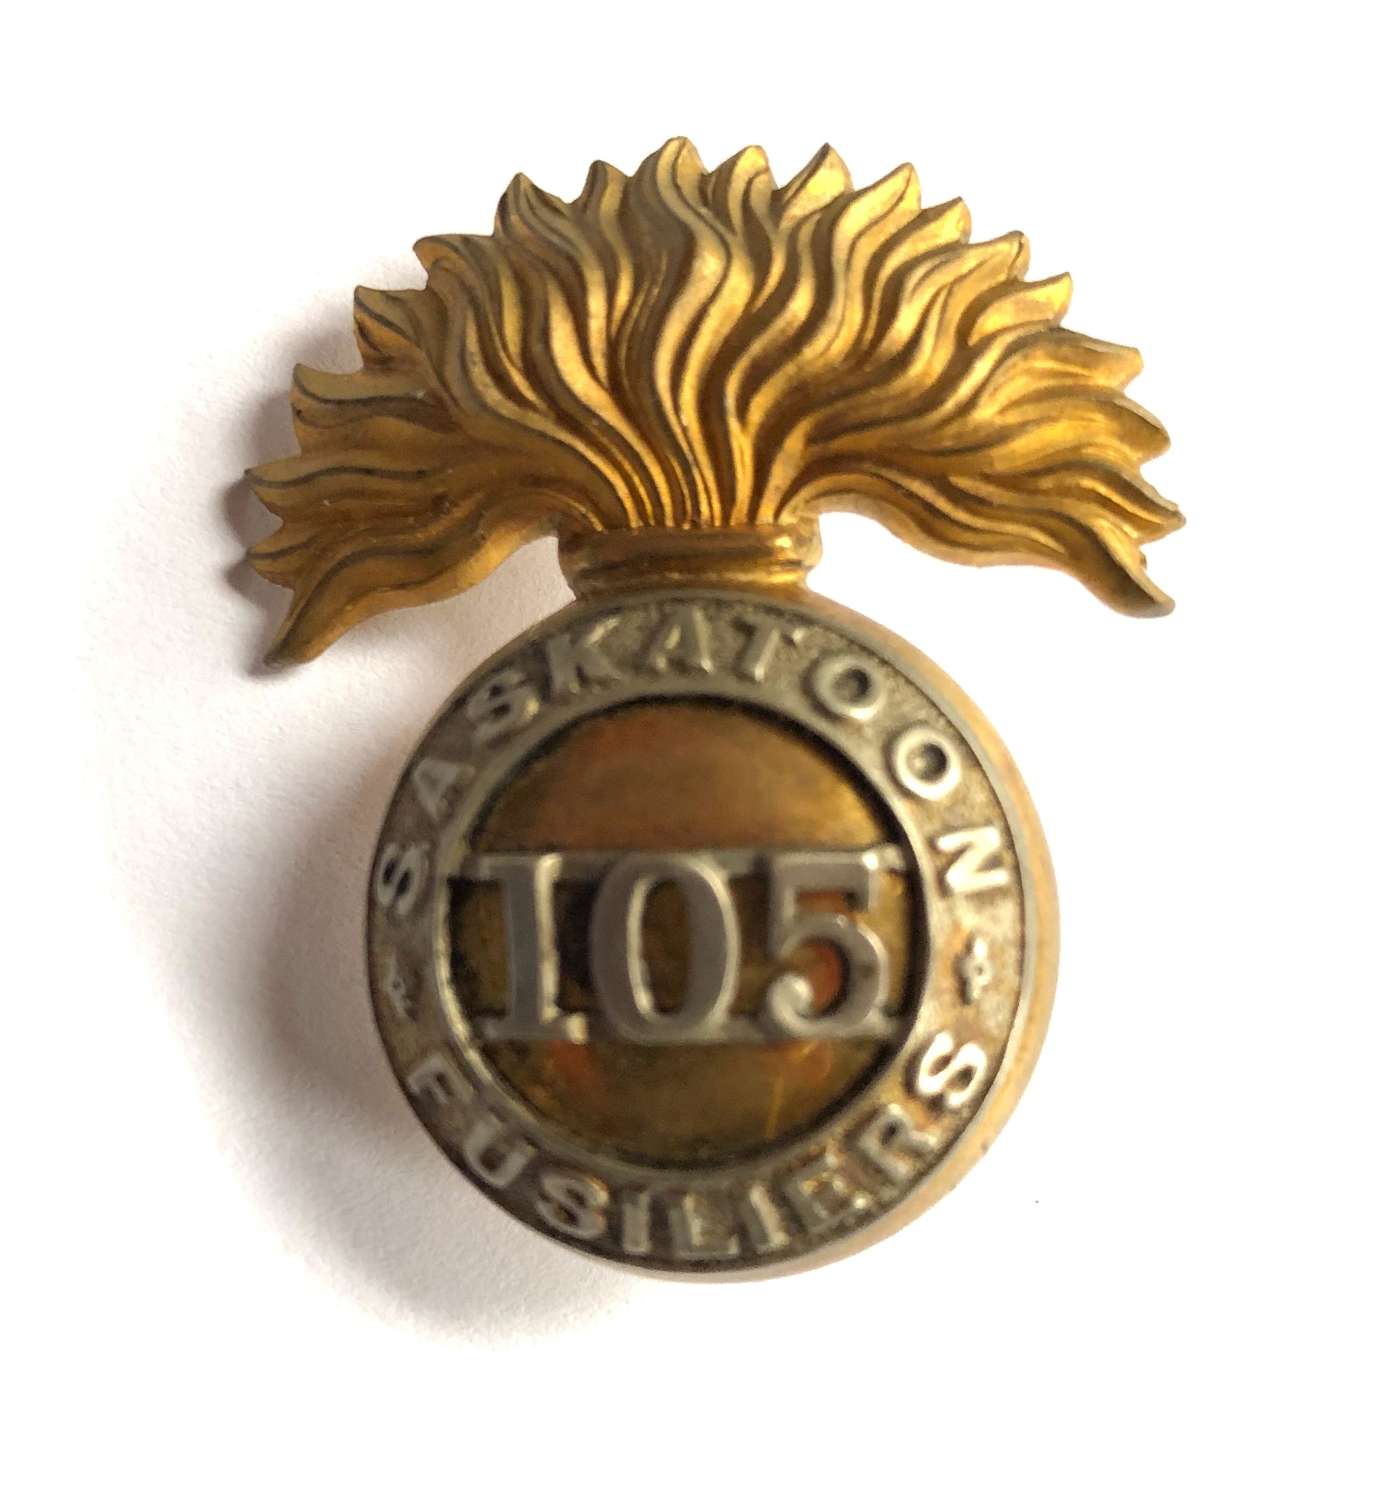 Canada. 105th Saskatoon Fusiliers Officere's cap badge by Hicks